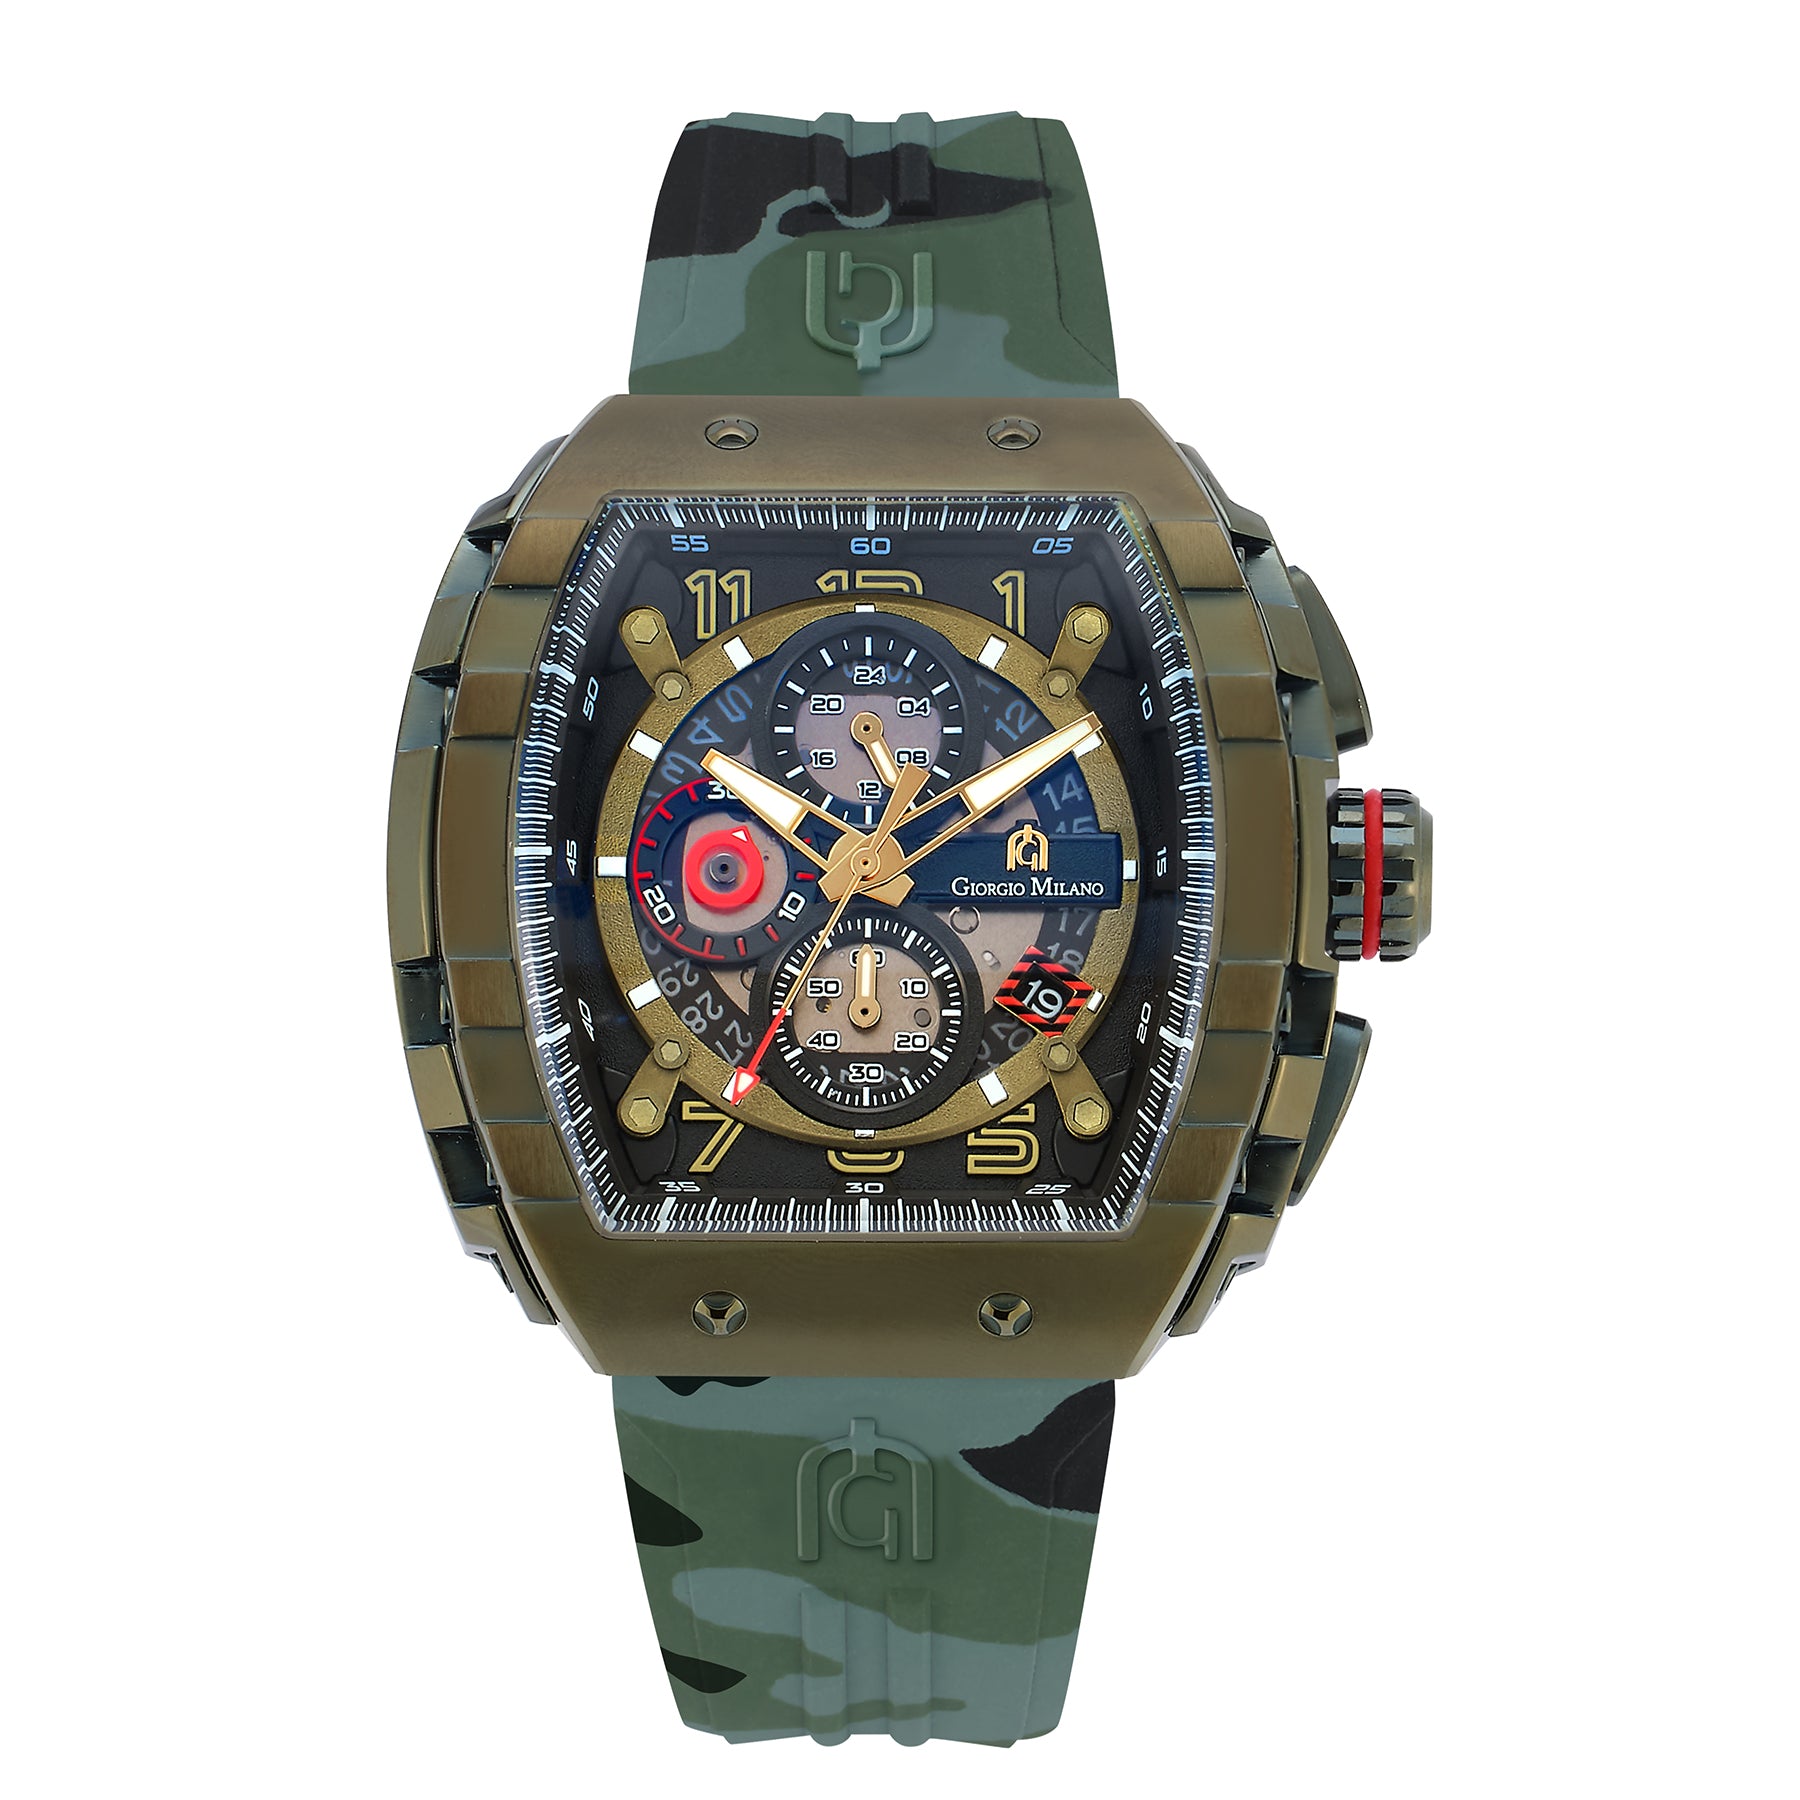 MAESTRO-233 (Green) military style